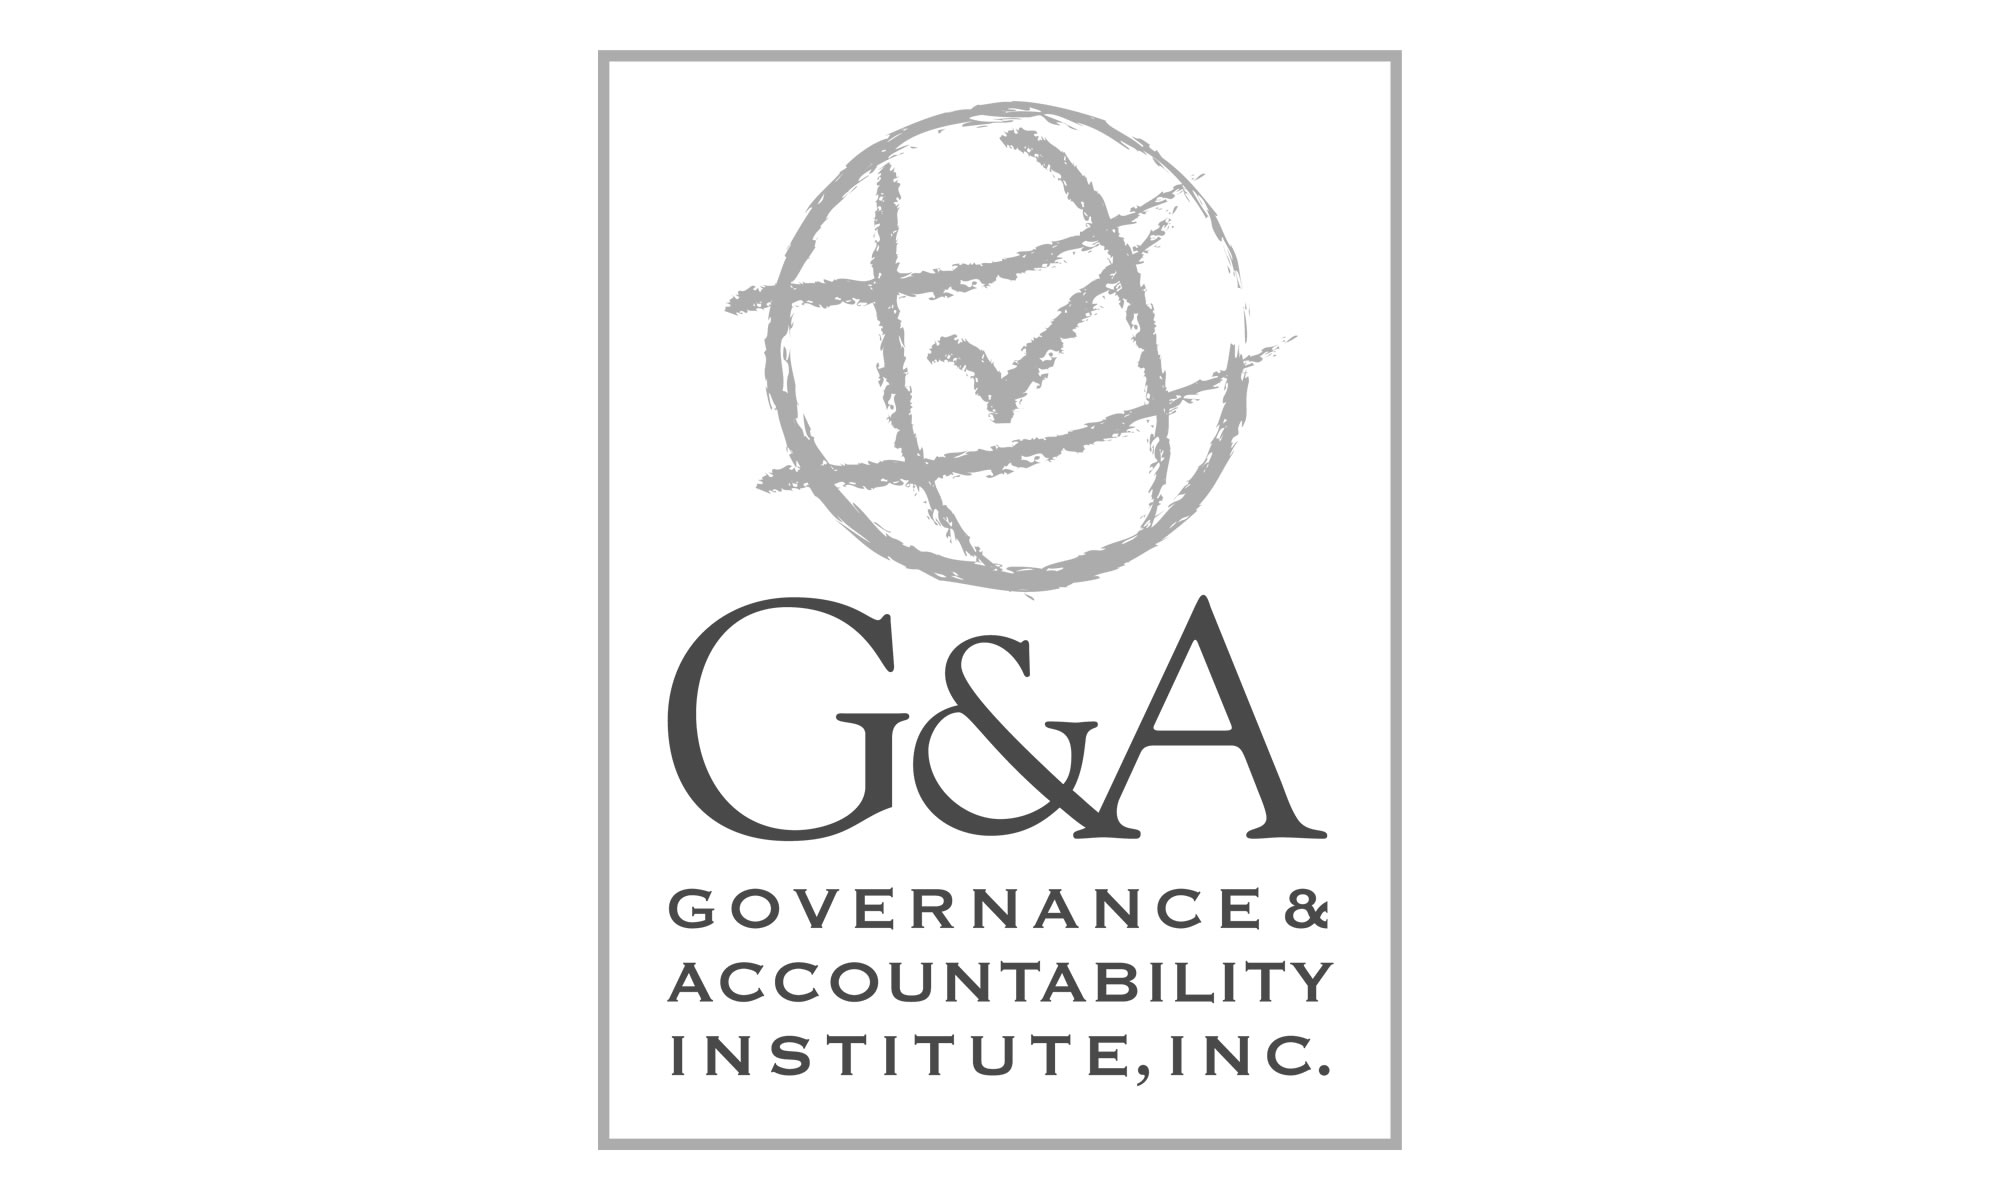 The Governance & Accountability Institute is an ESG and Sustainability consulting firm, founded in 2006, based in NYC, focused on helping clients become leaders in Corporate Sustainability, Responsibility, Citizenship -- including the full breadth of Environmental, Social and Corporate Governance (ESG) issues. 